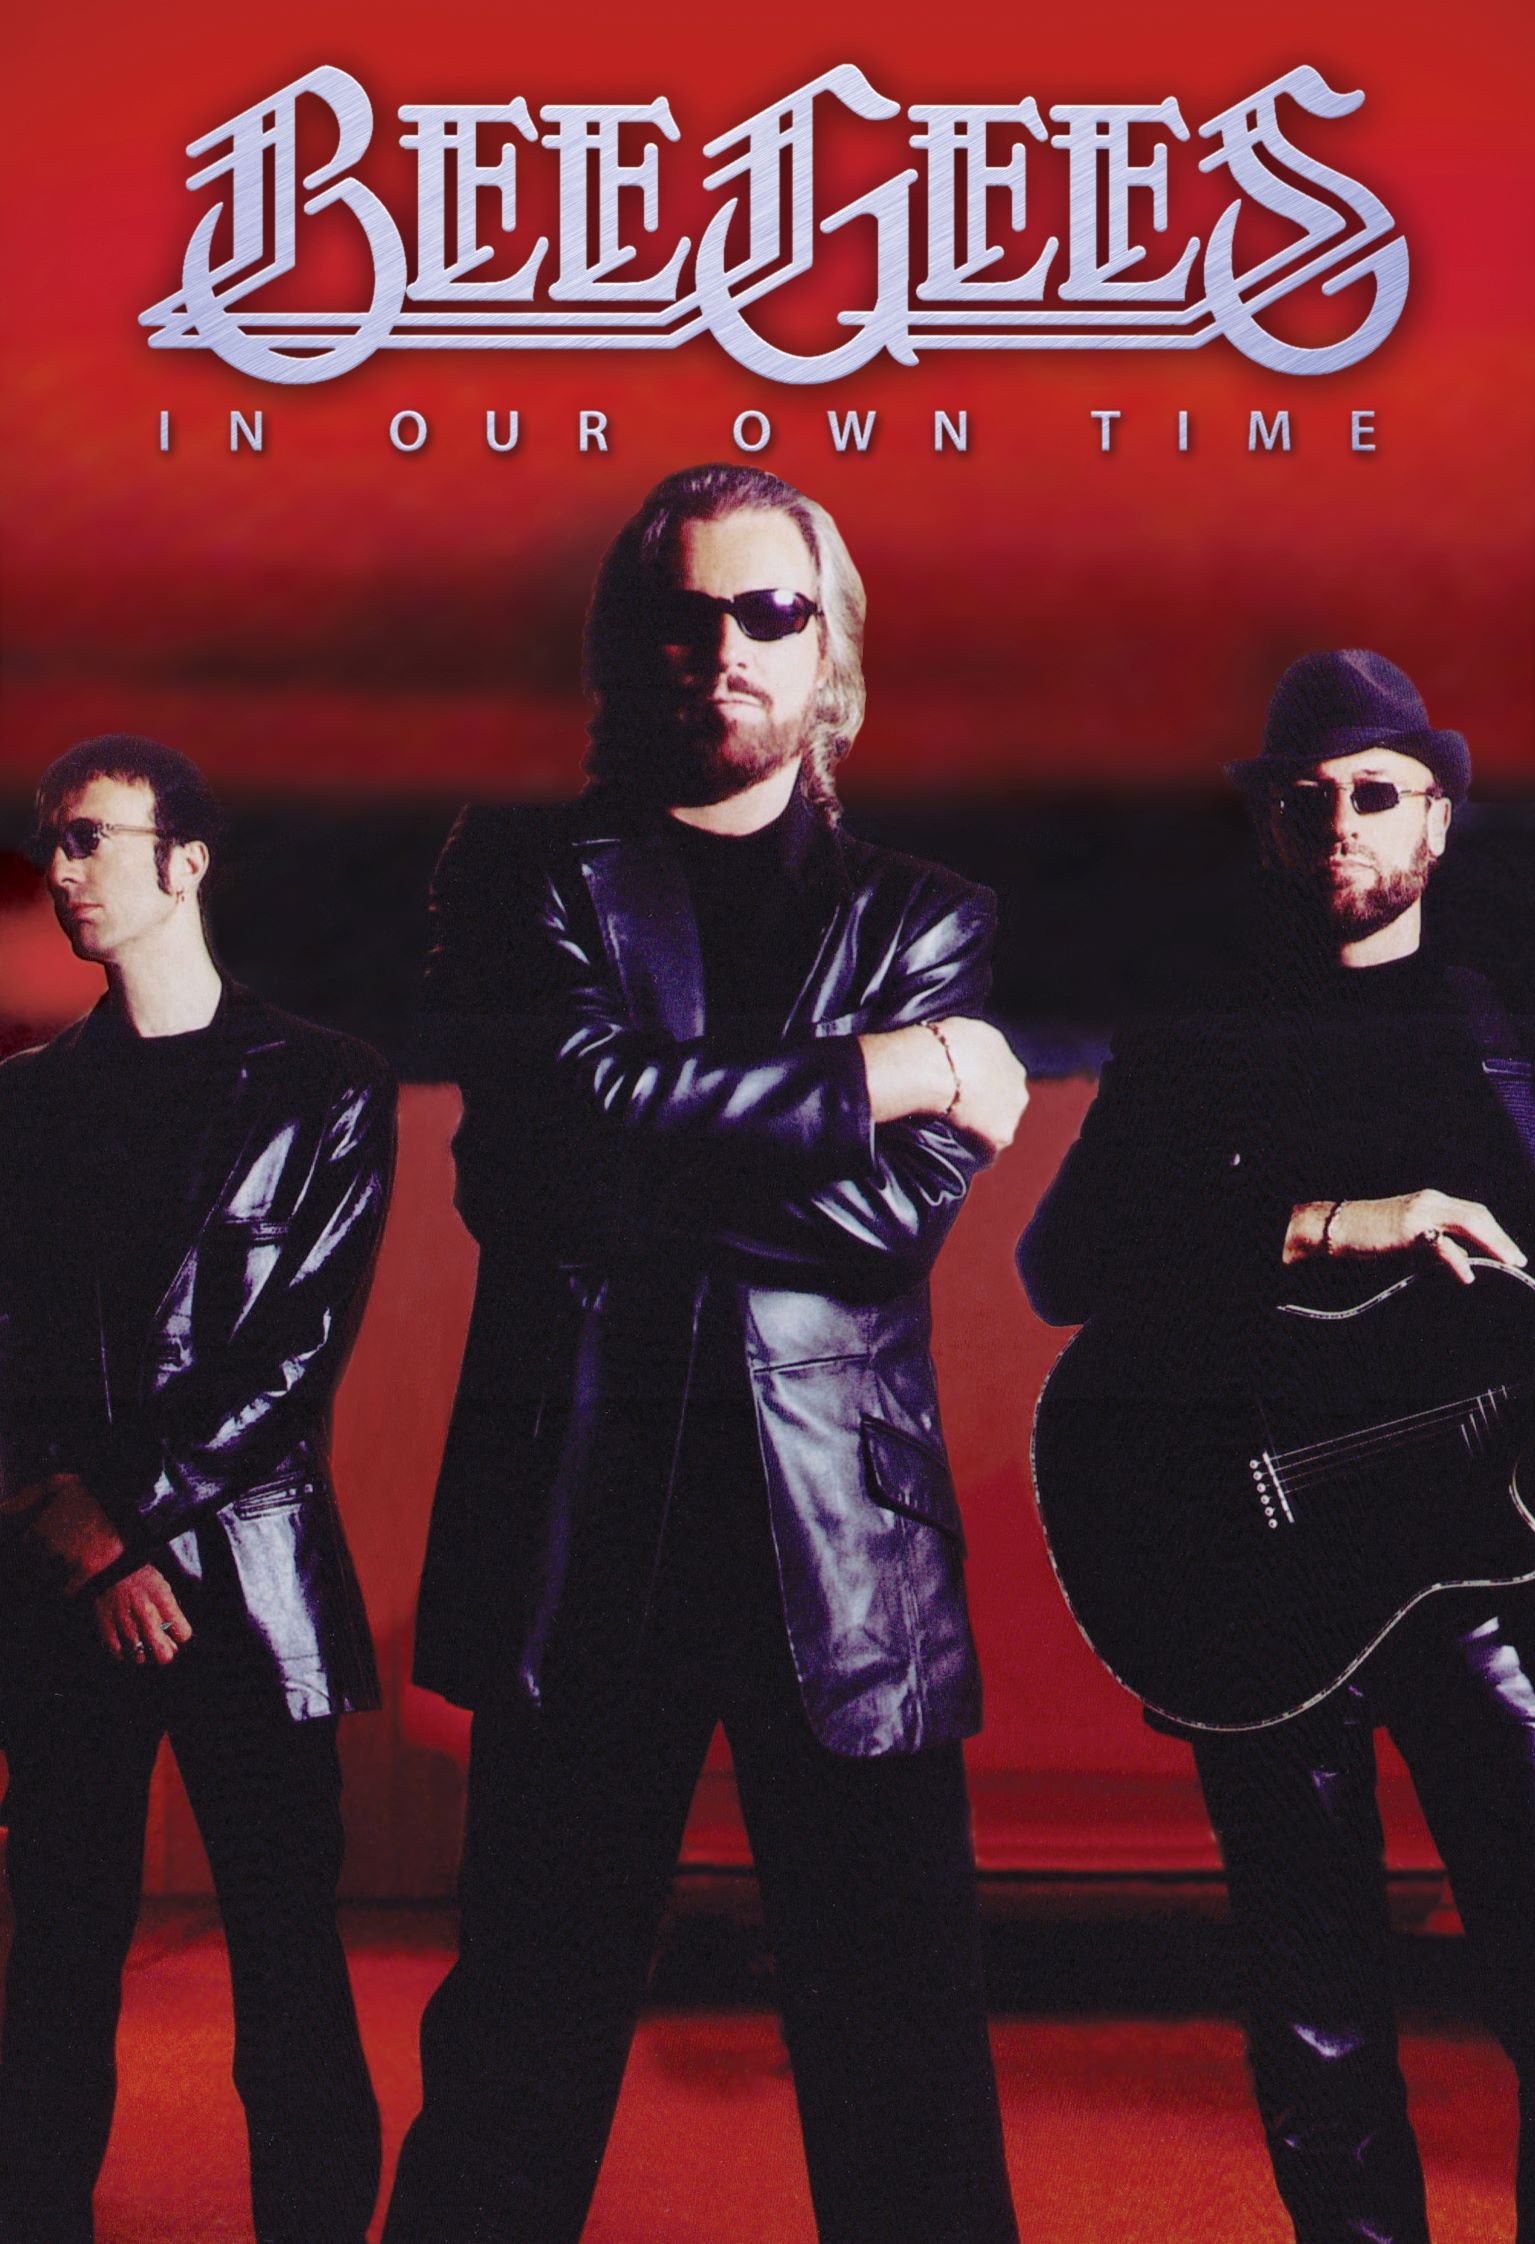 Bee Gees In Our Own Time Cover Image.jpg